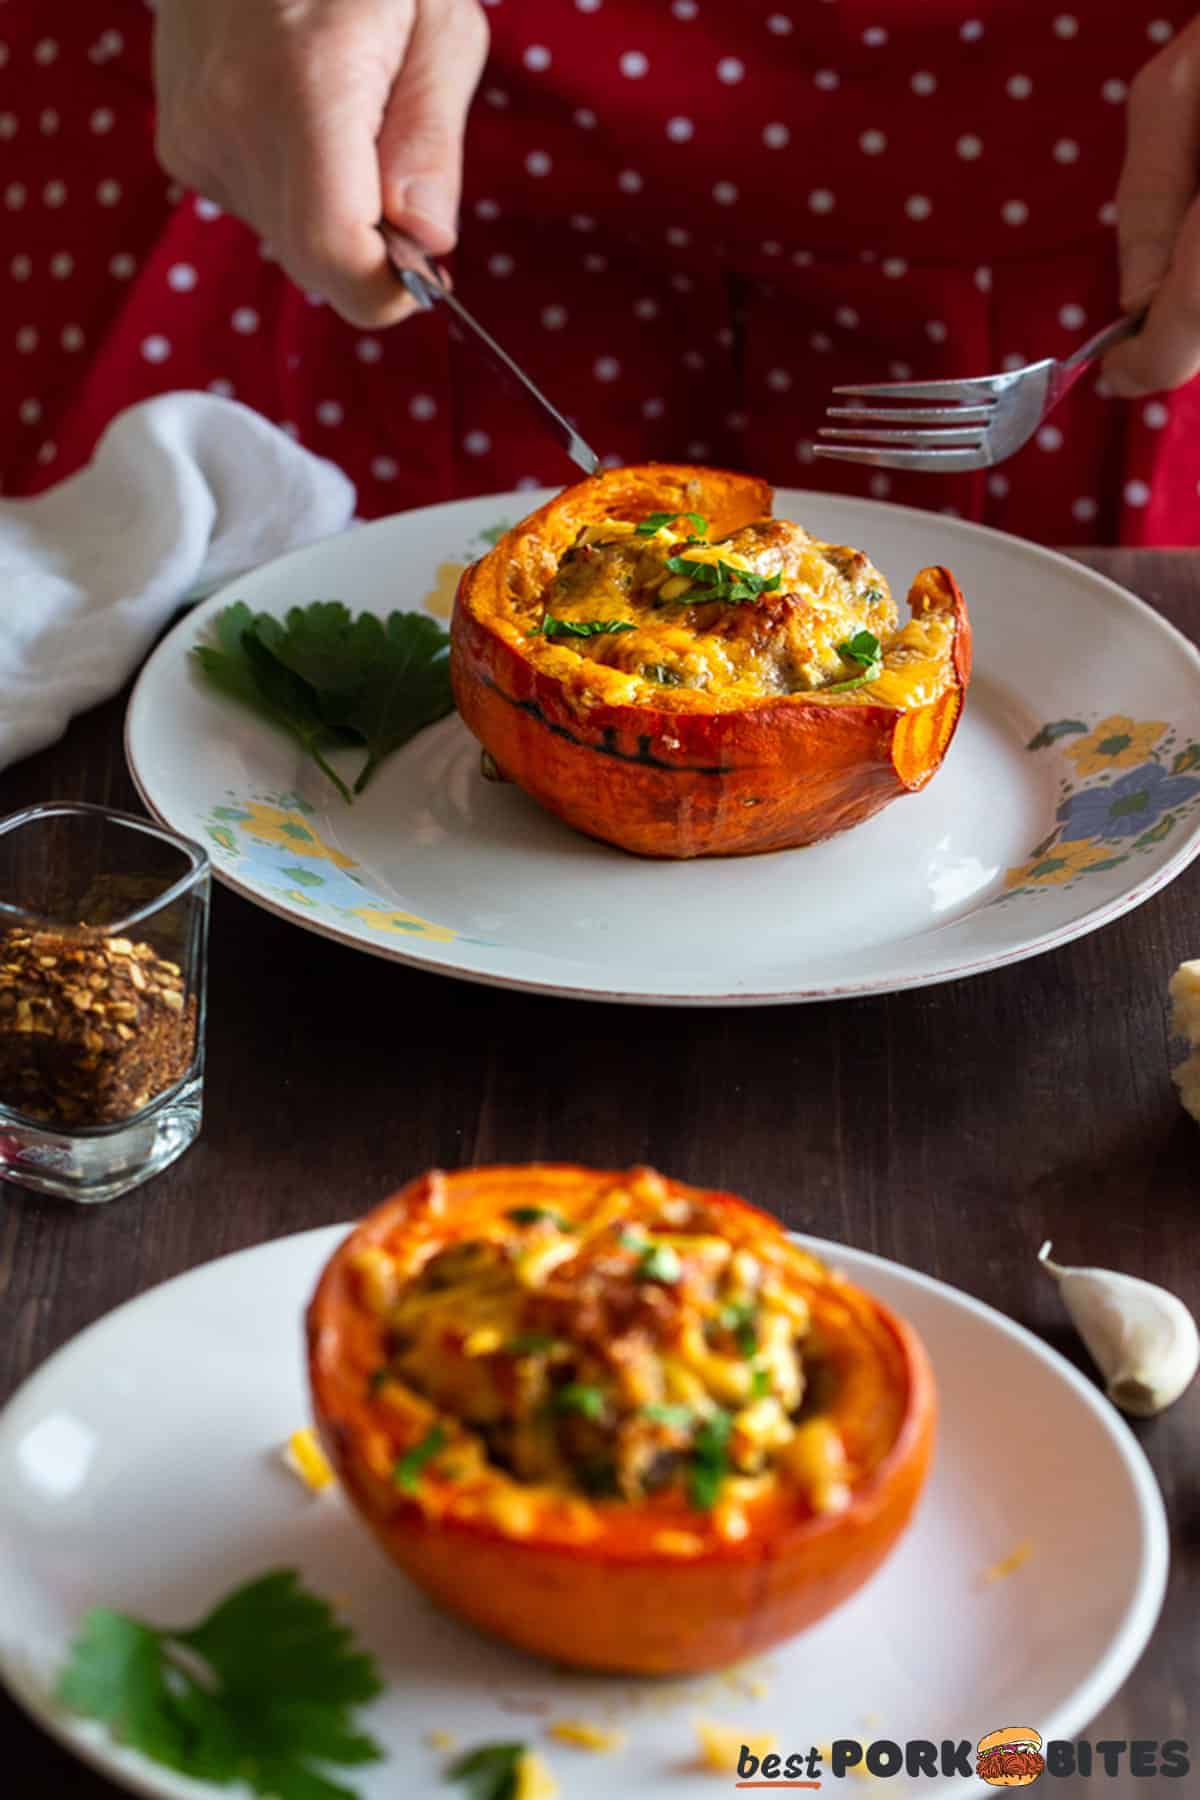 two plates with stuffed squash with hands cutting into one squash